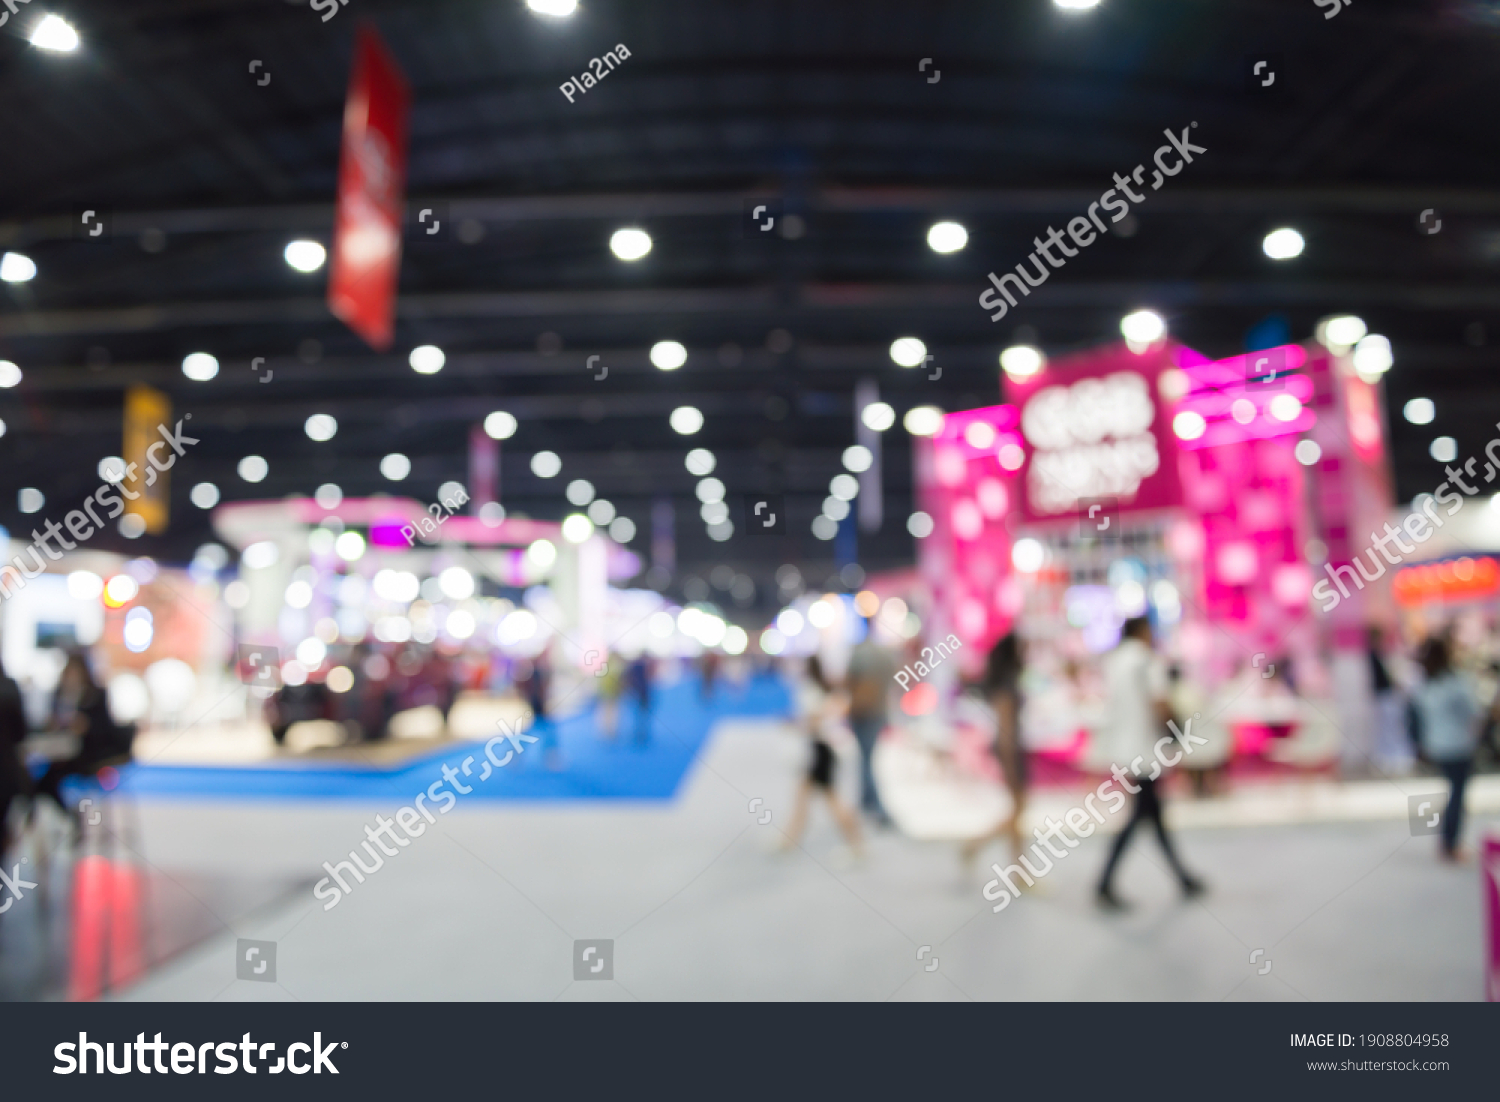 Abstract blur people in exhibition hall event trade show expo background. Large international exhibition, convention center, business marketing and event fair organizer concept. #1908804958